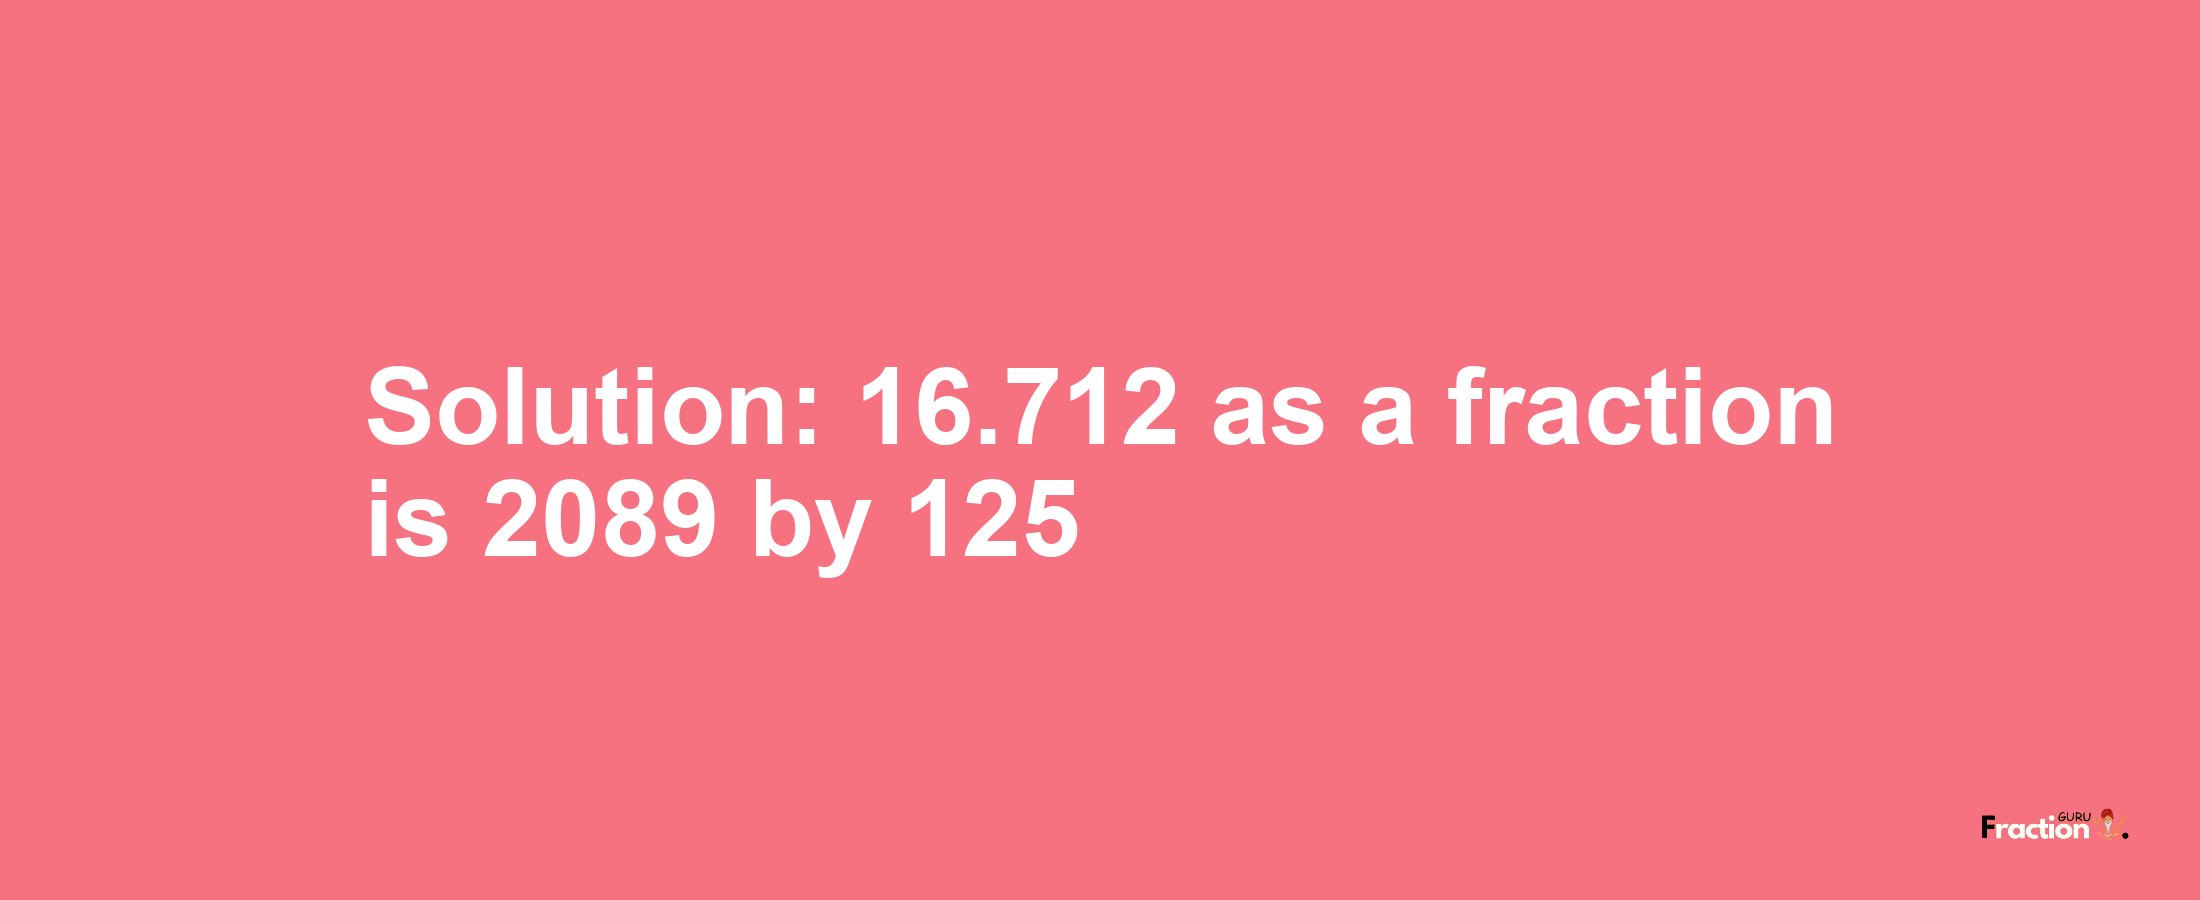 Solution:16.712 as a fraction is 2089/125